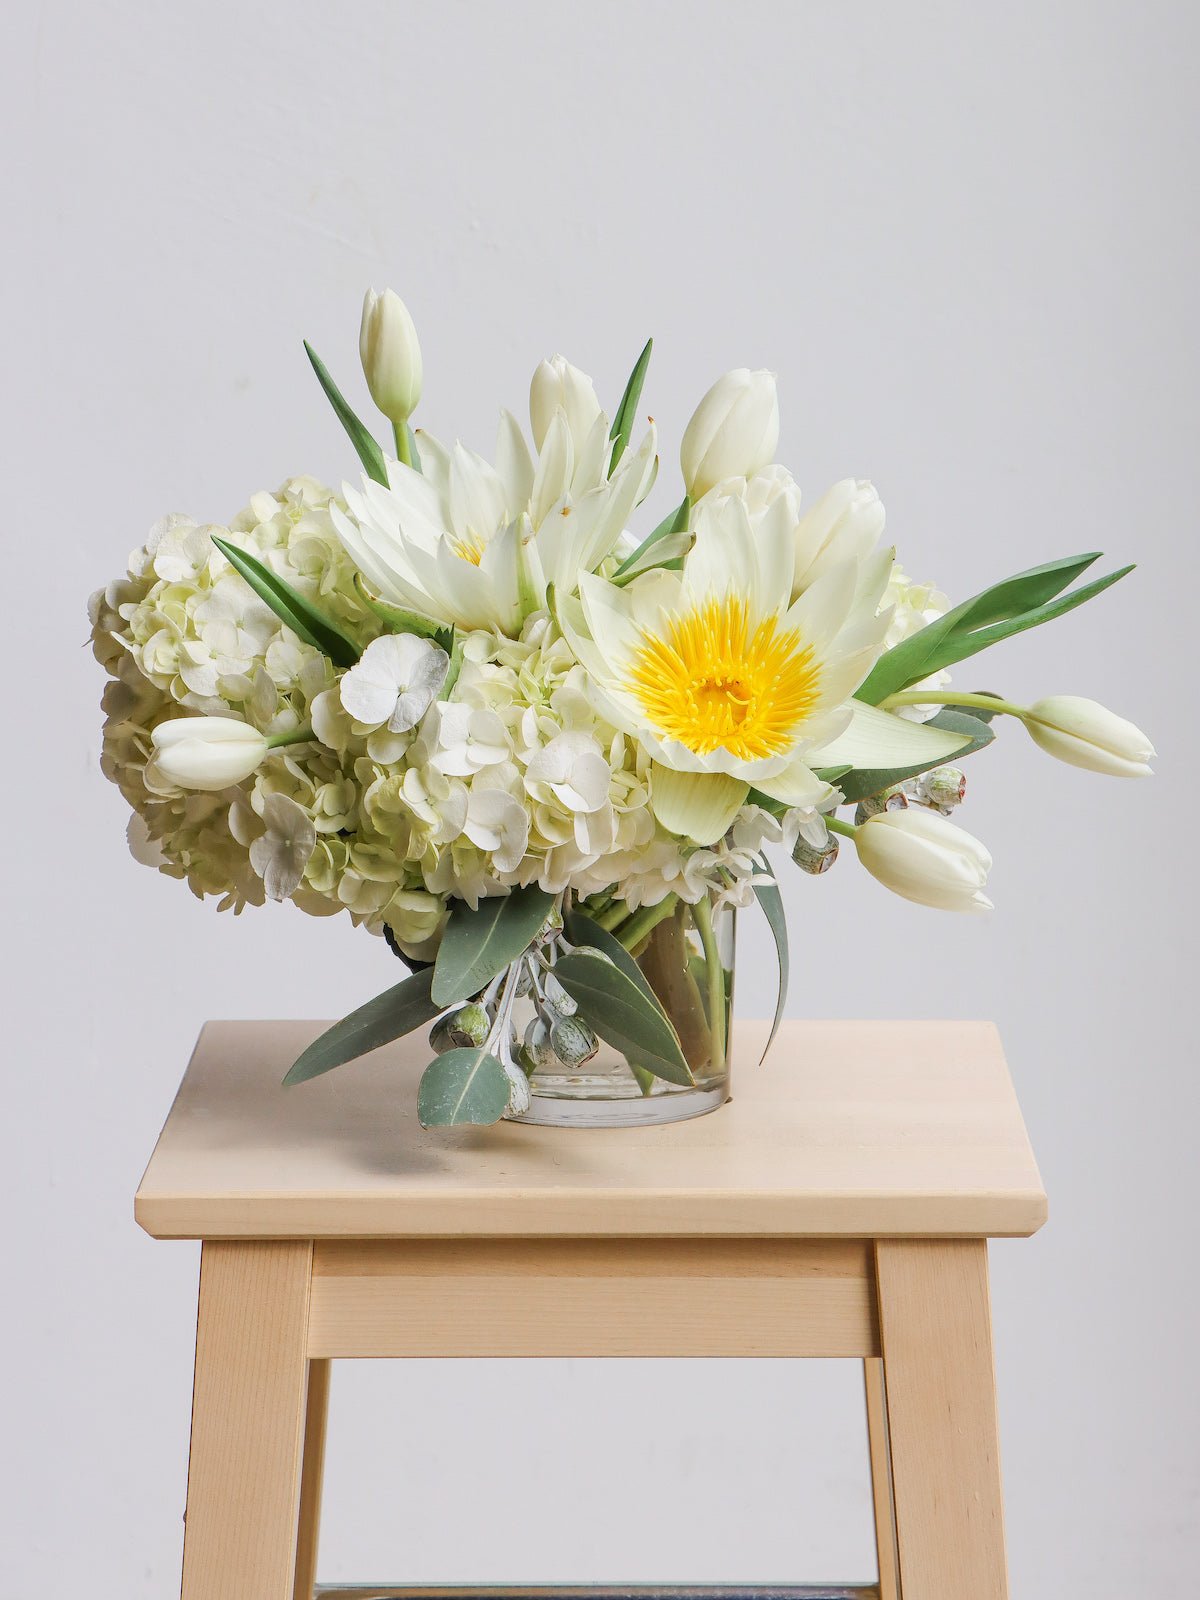 A white coloured floral arrangement in a small vase. The flowers/foliage pictured are Waterlilies, Hydrangea, Tulips and eucalyptus leaves. The arrangement is sitting on a light wooden stool in front of a white background. 